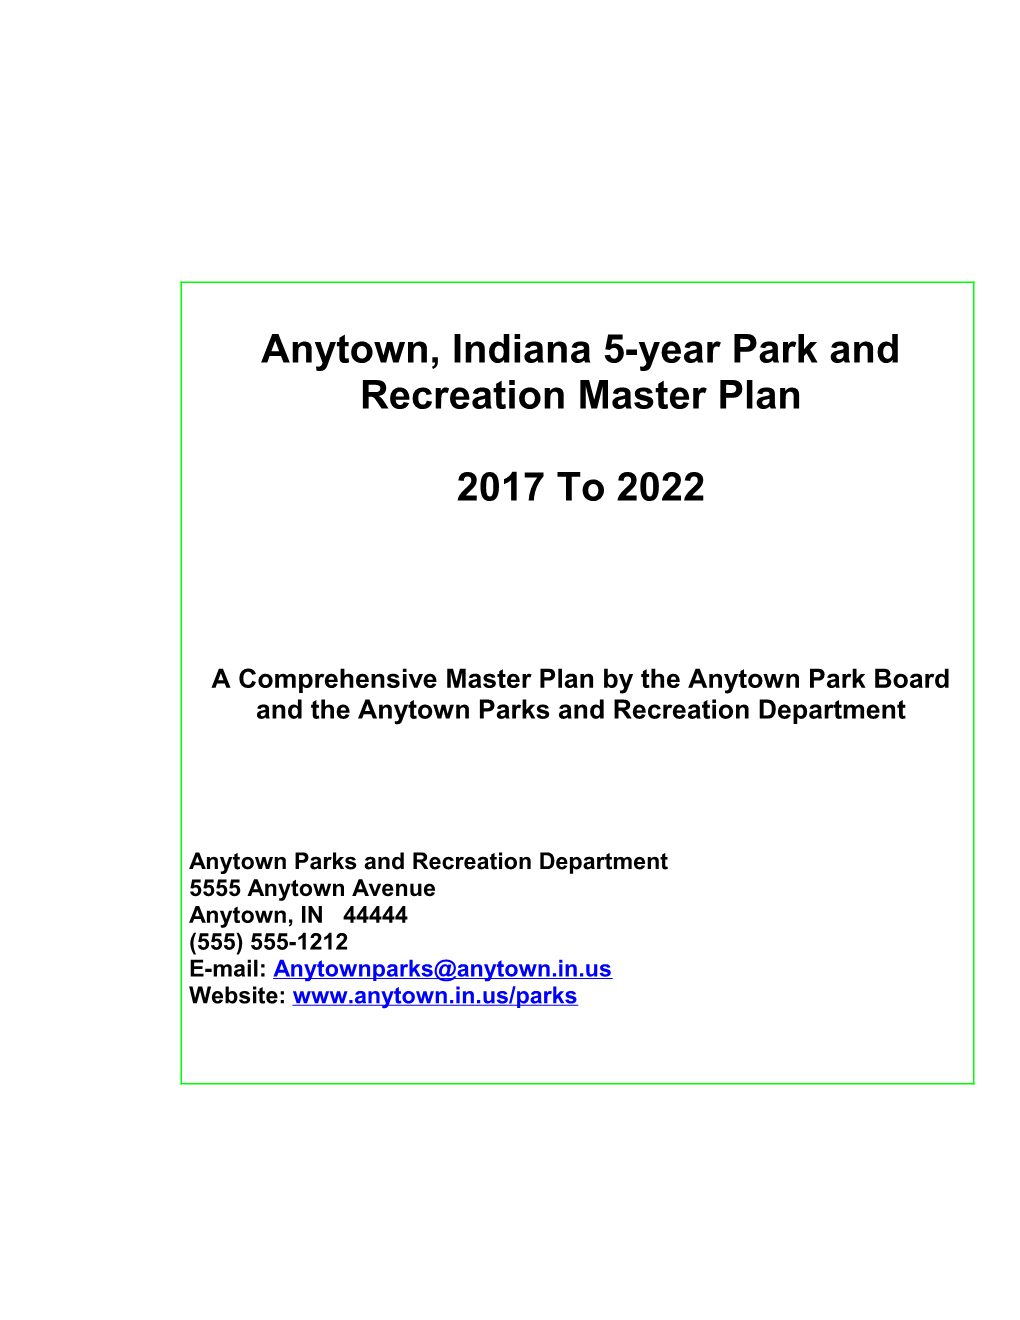 Anytown Indiana 5-Year Park and Recreation Master Plan